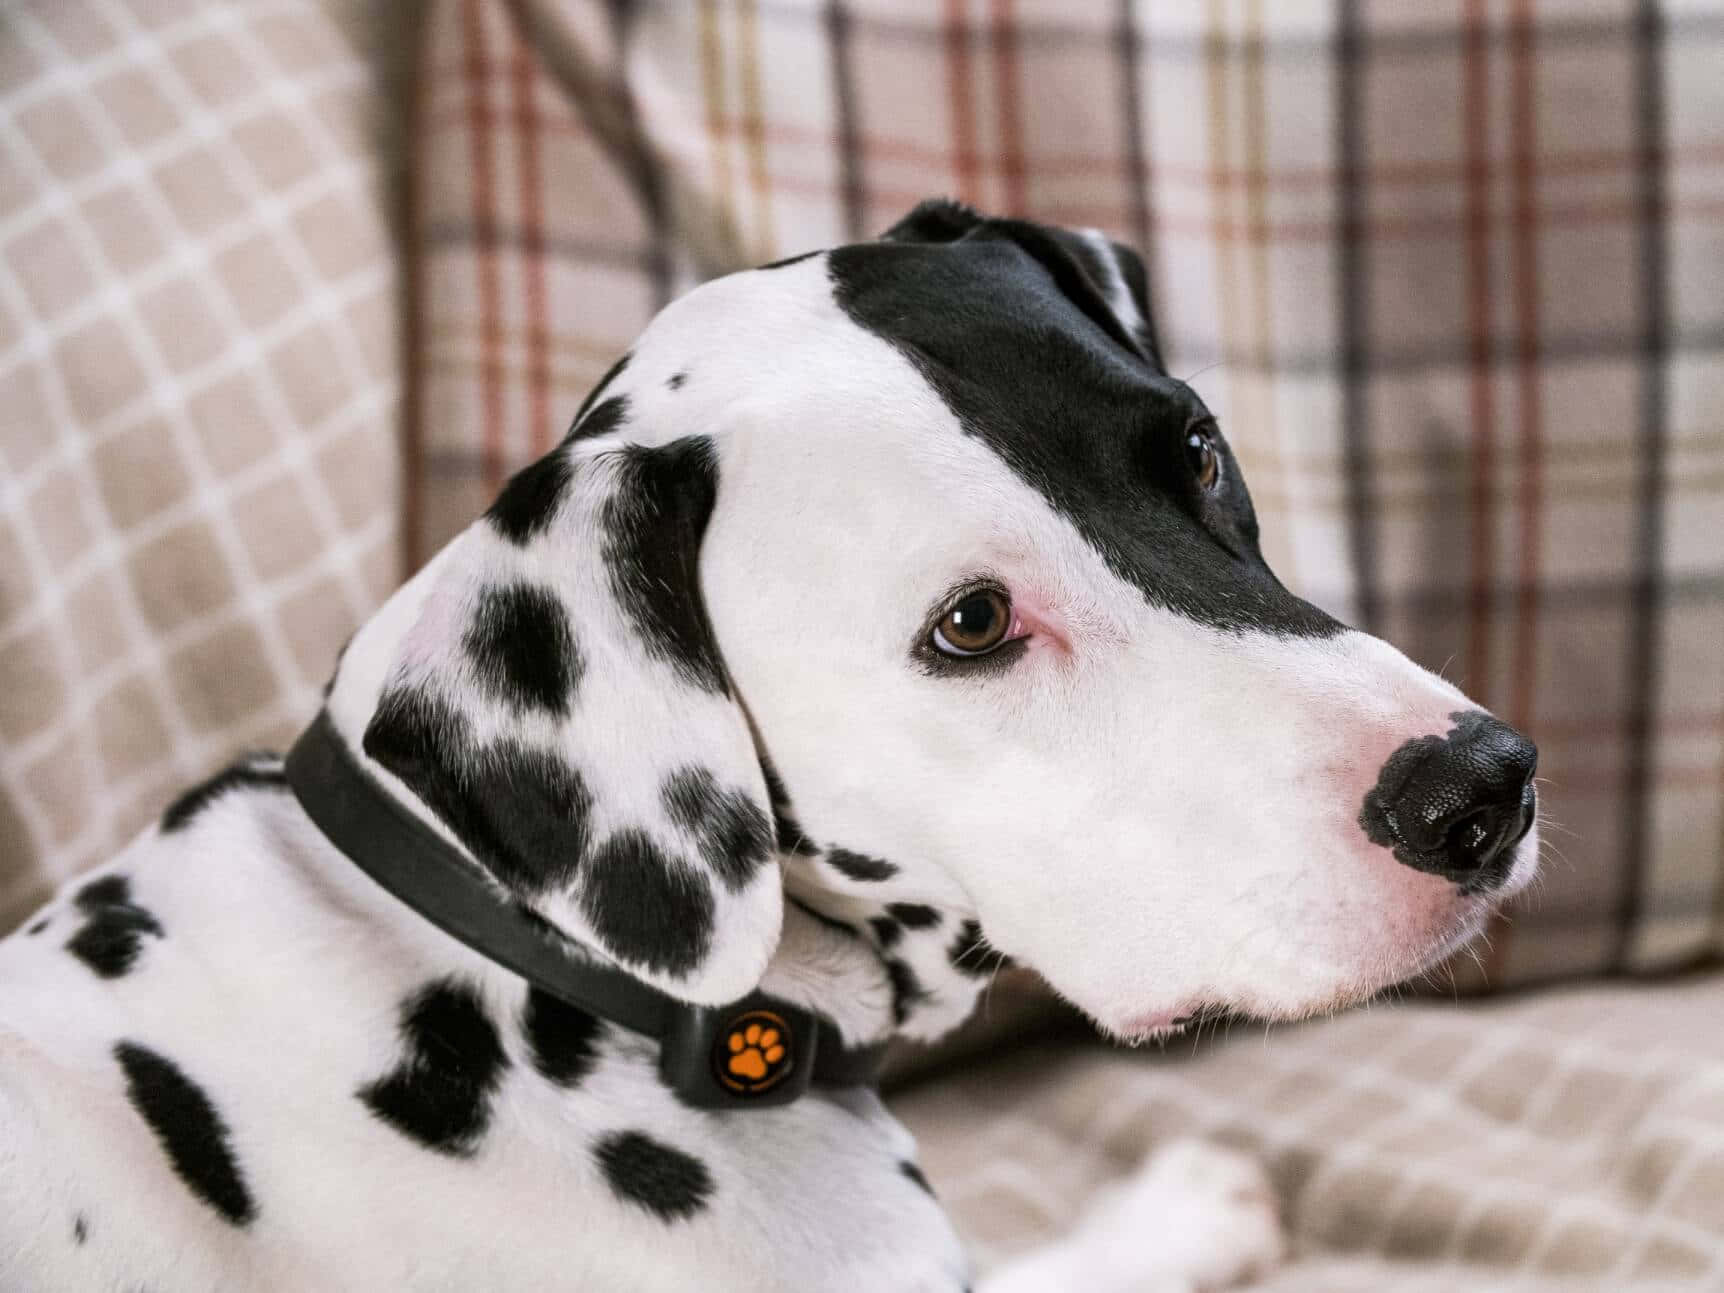 A Dalmatian Dog With His Head Tilted